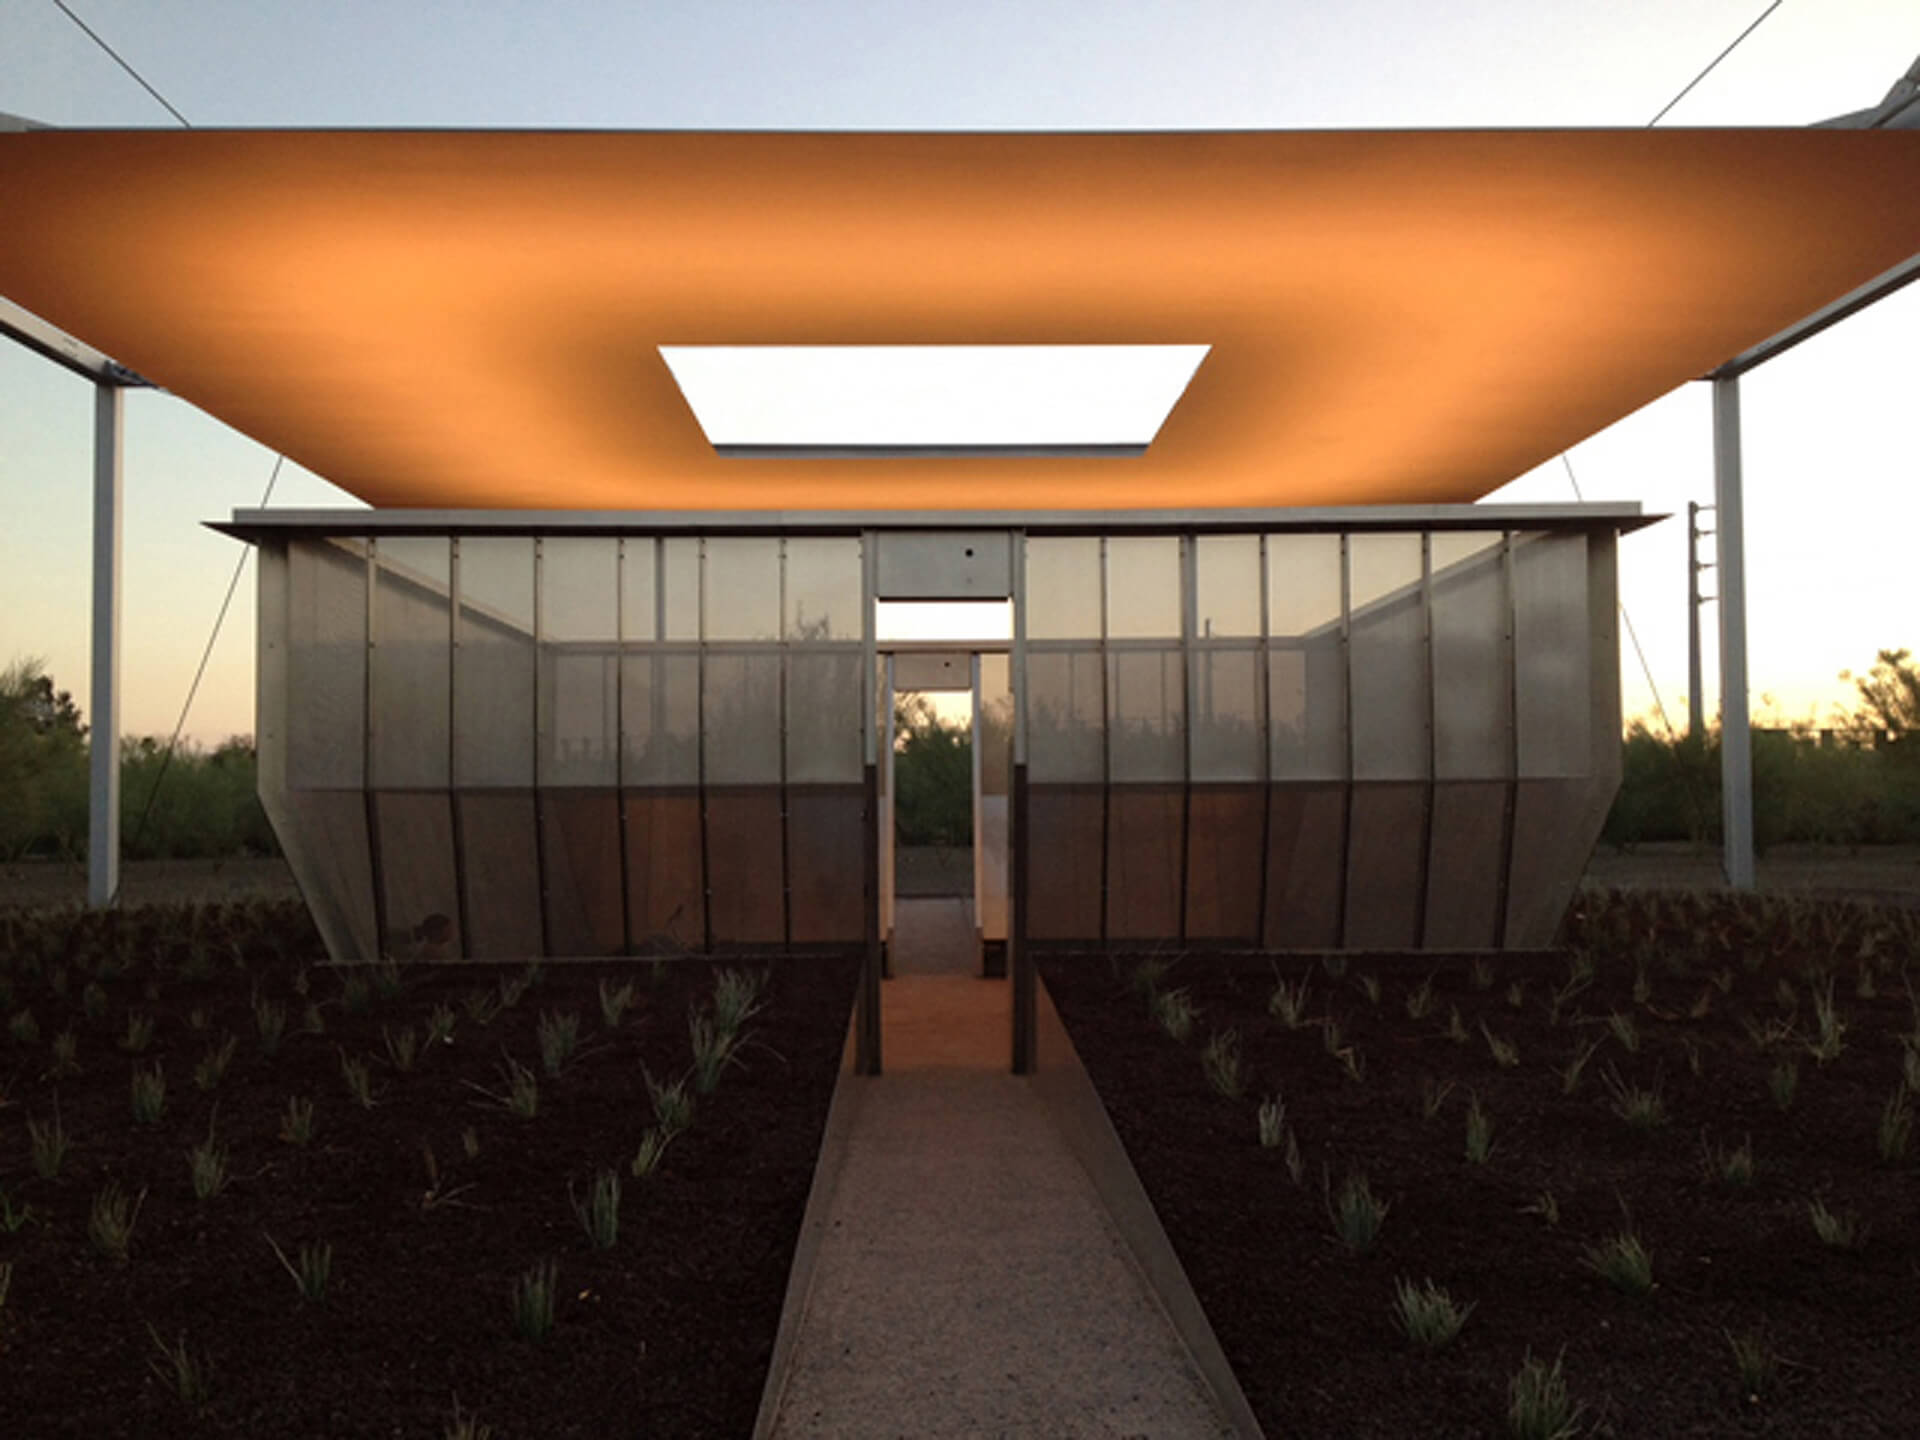 James Turrell - Air Apparent, 2012, 30 by 30 by 30 feet, Tempe, Arizona